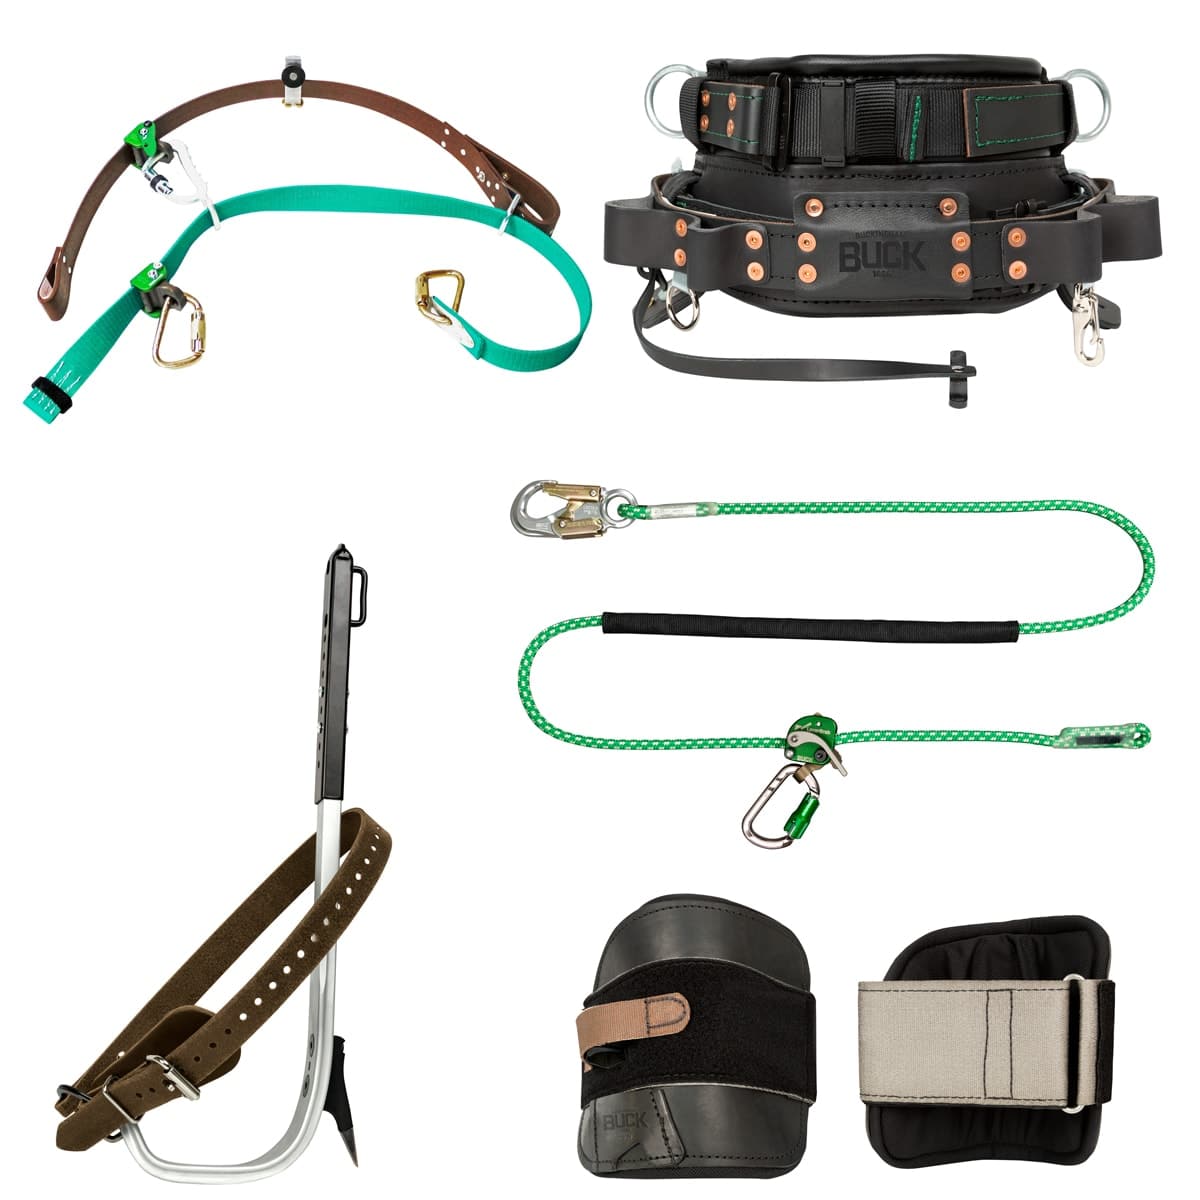 Big Man Climbing Kit with Distribution EZ Squeeze™ with Inner Web Strap -  400KITQ2